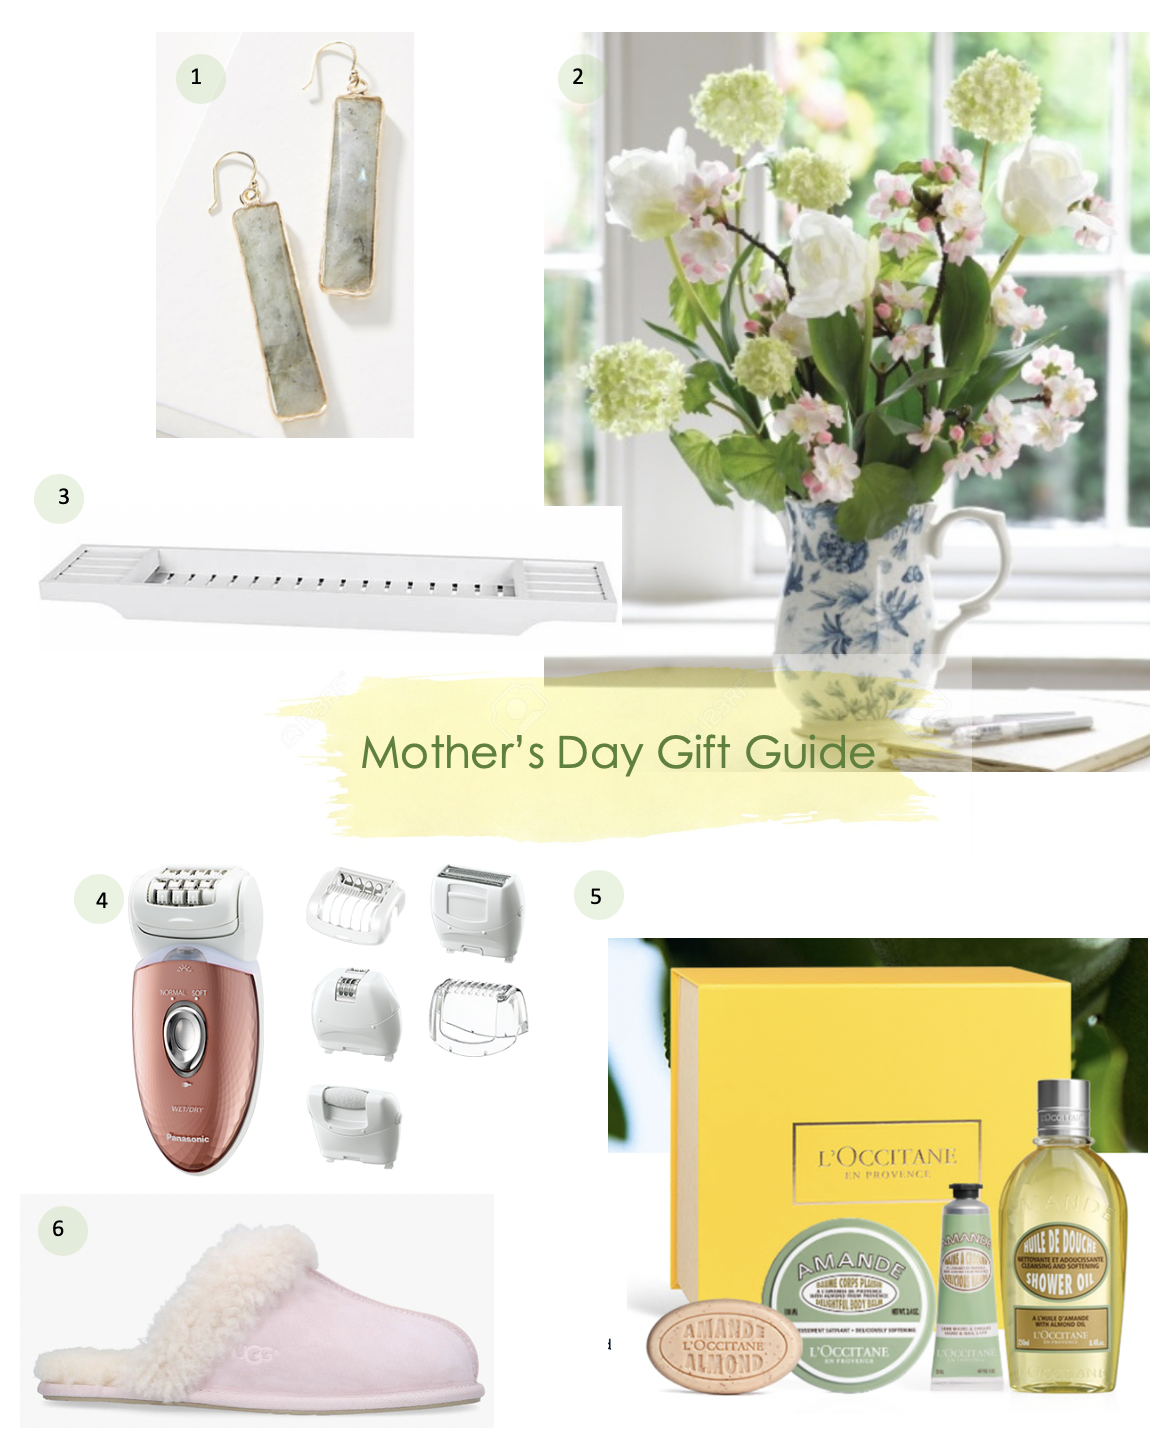 Mother's Day Gift Guide containing beauty products in various price ranges.